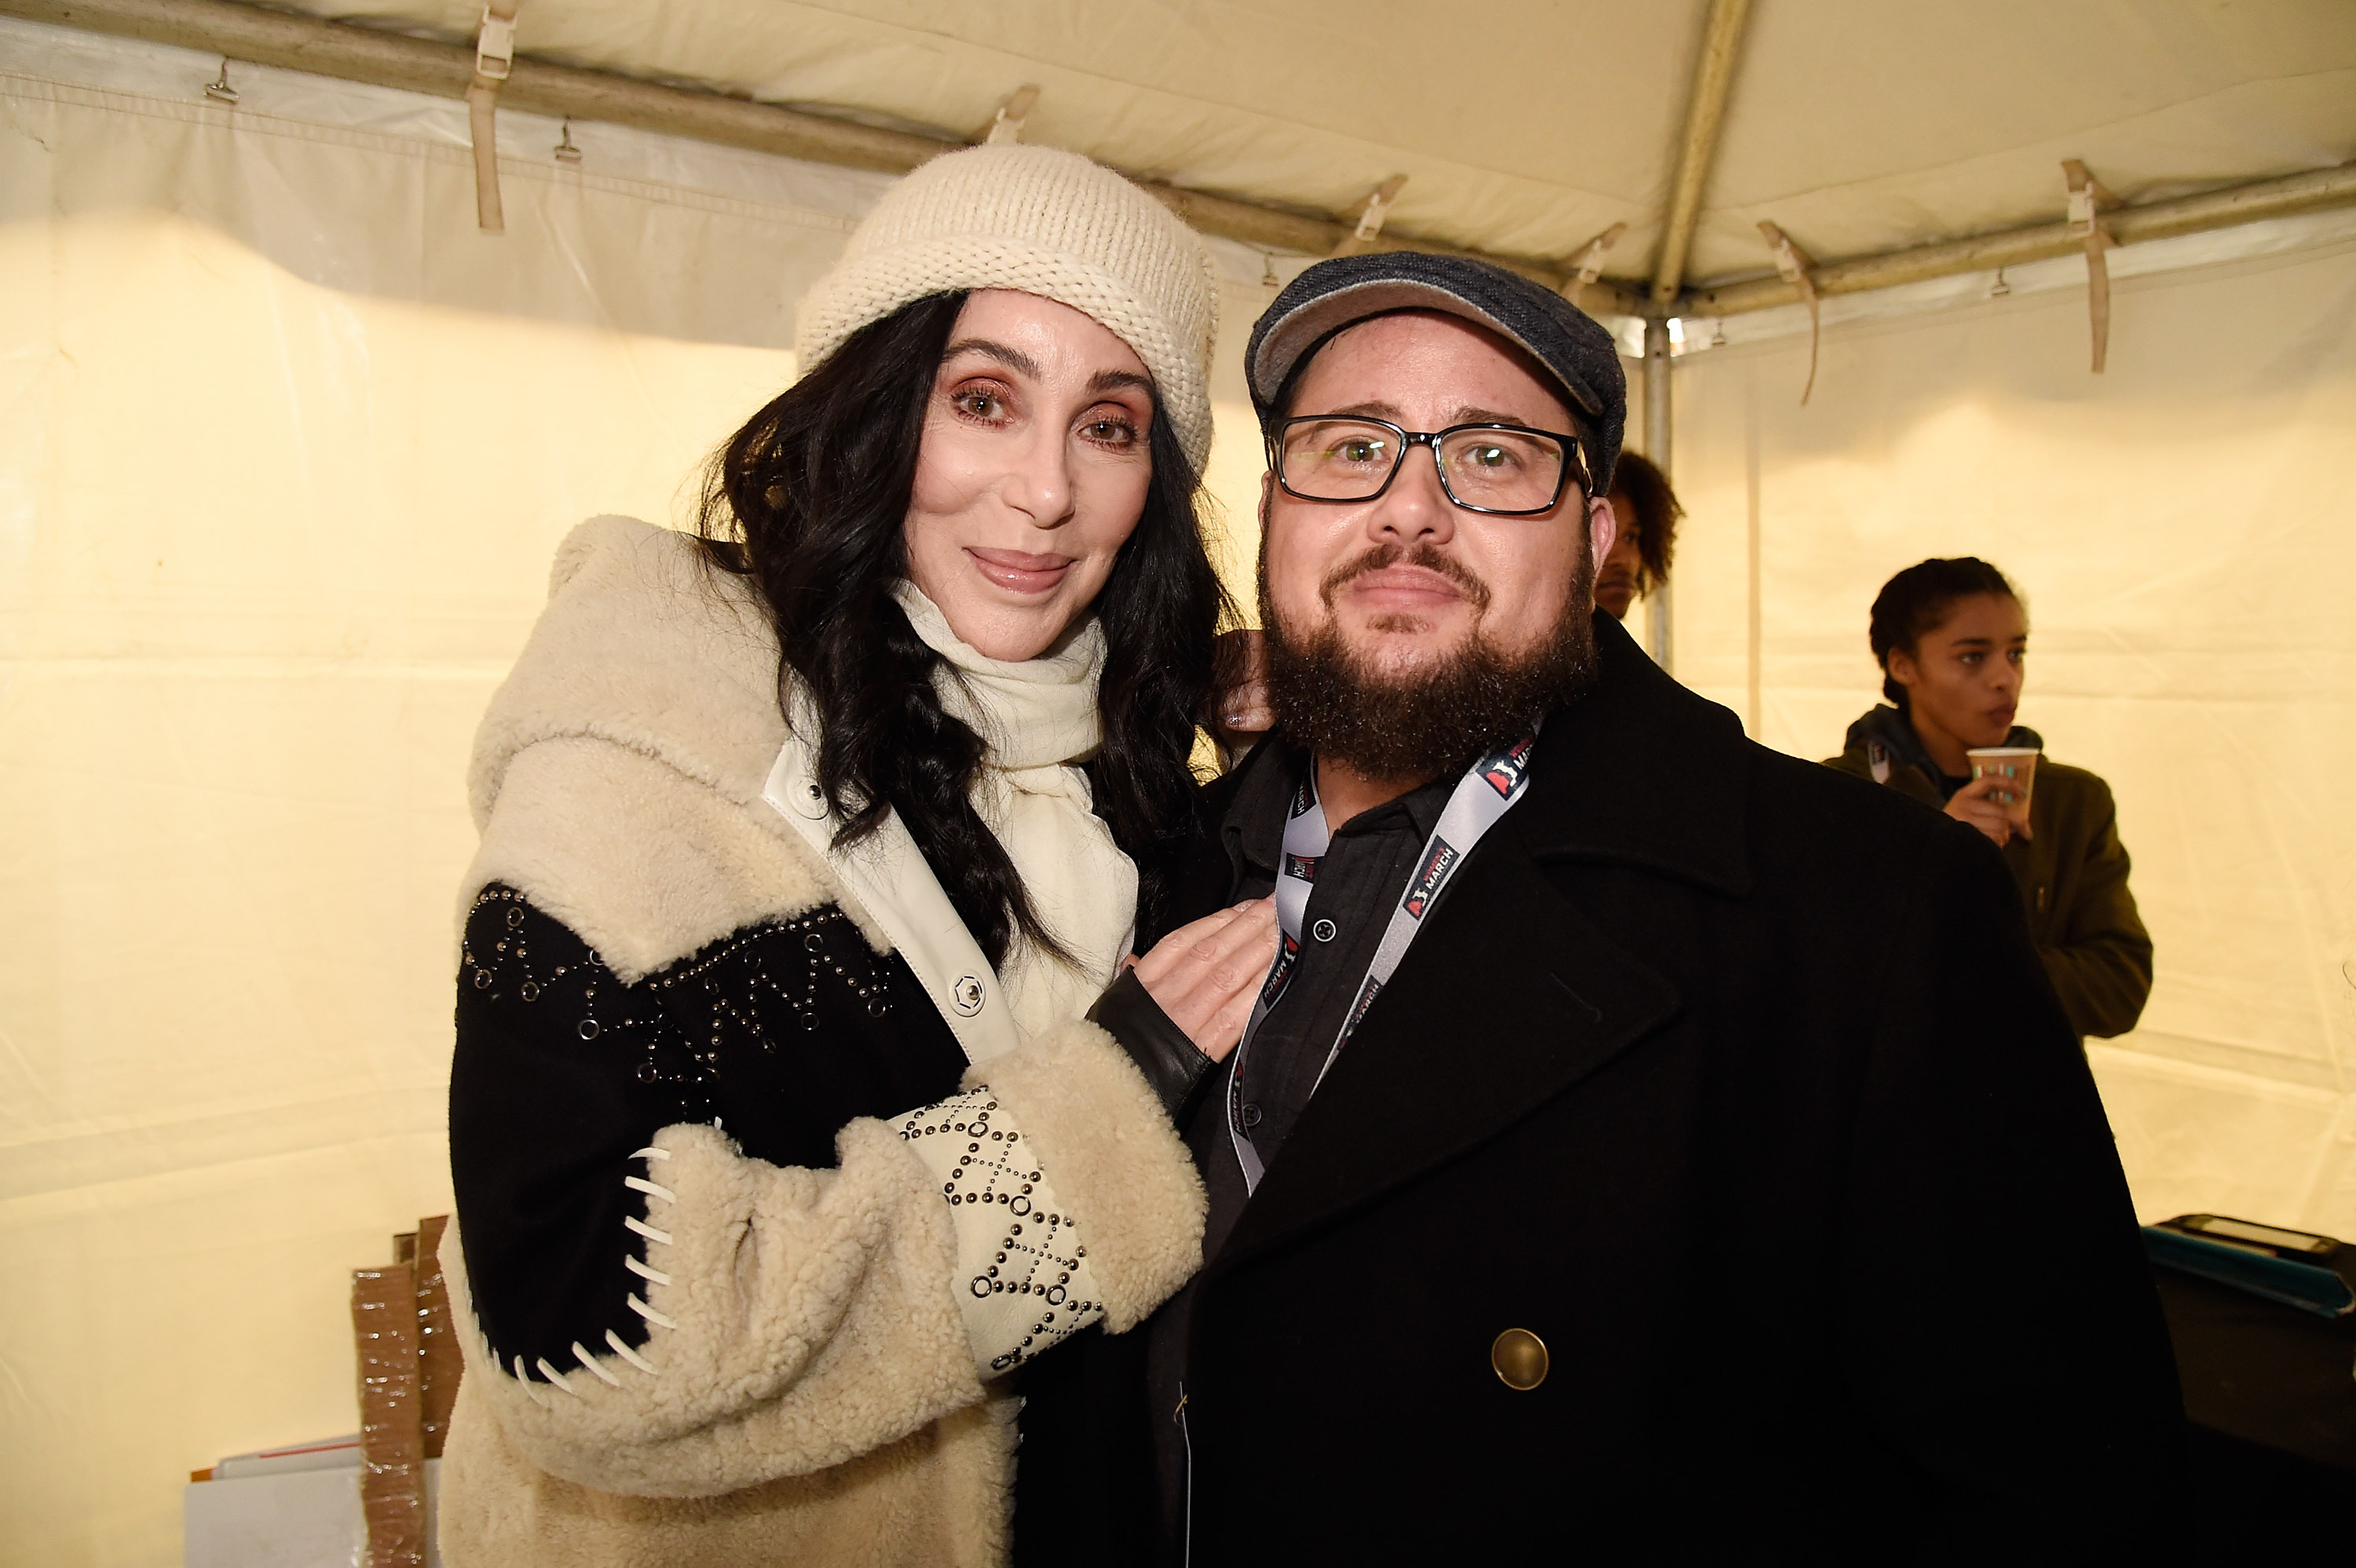 Cher and Chaz Bono attend the rally at the Women's March on Washington on January 21, 2017. | Source: Getty Images